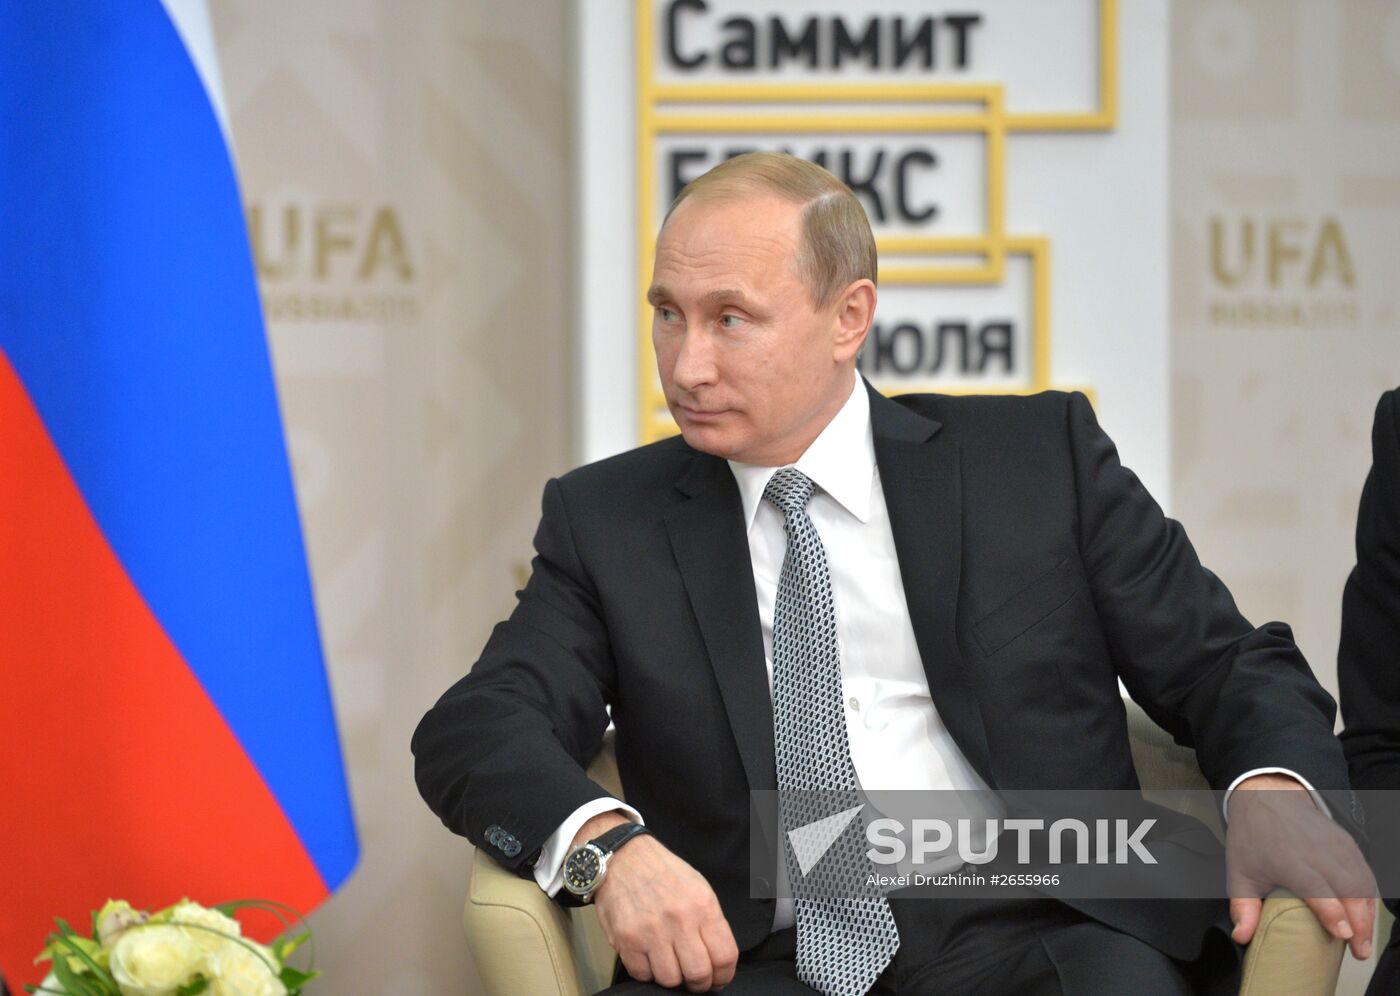 President of the Russian Federation Vladimir Putin meets with President of the Republic of South Africa Jacob Zuma